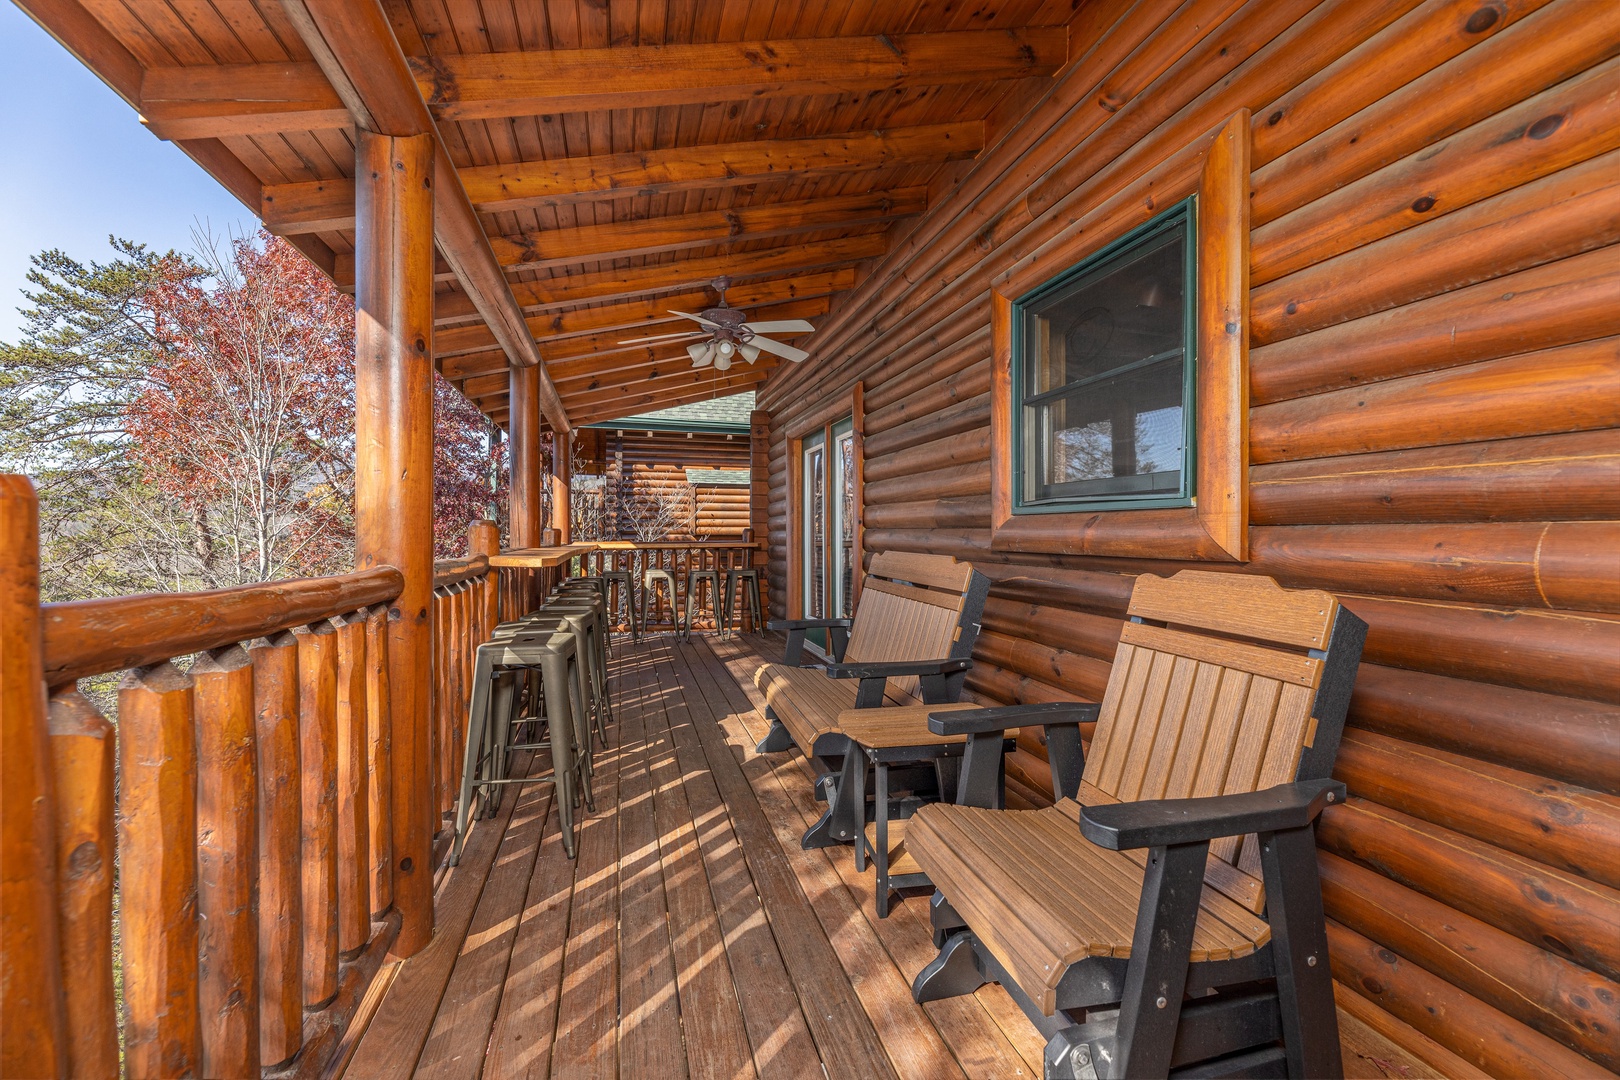 Bar stools & benches on a deck at Loving Every Minute, a 5 bedroom cabin rental located in Pigeon Forge